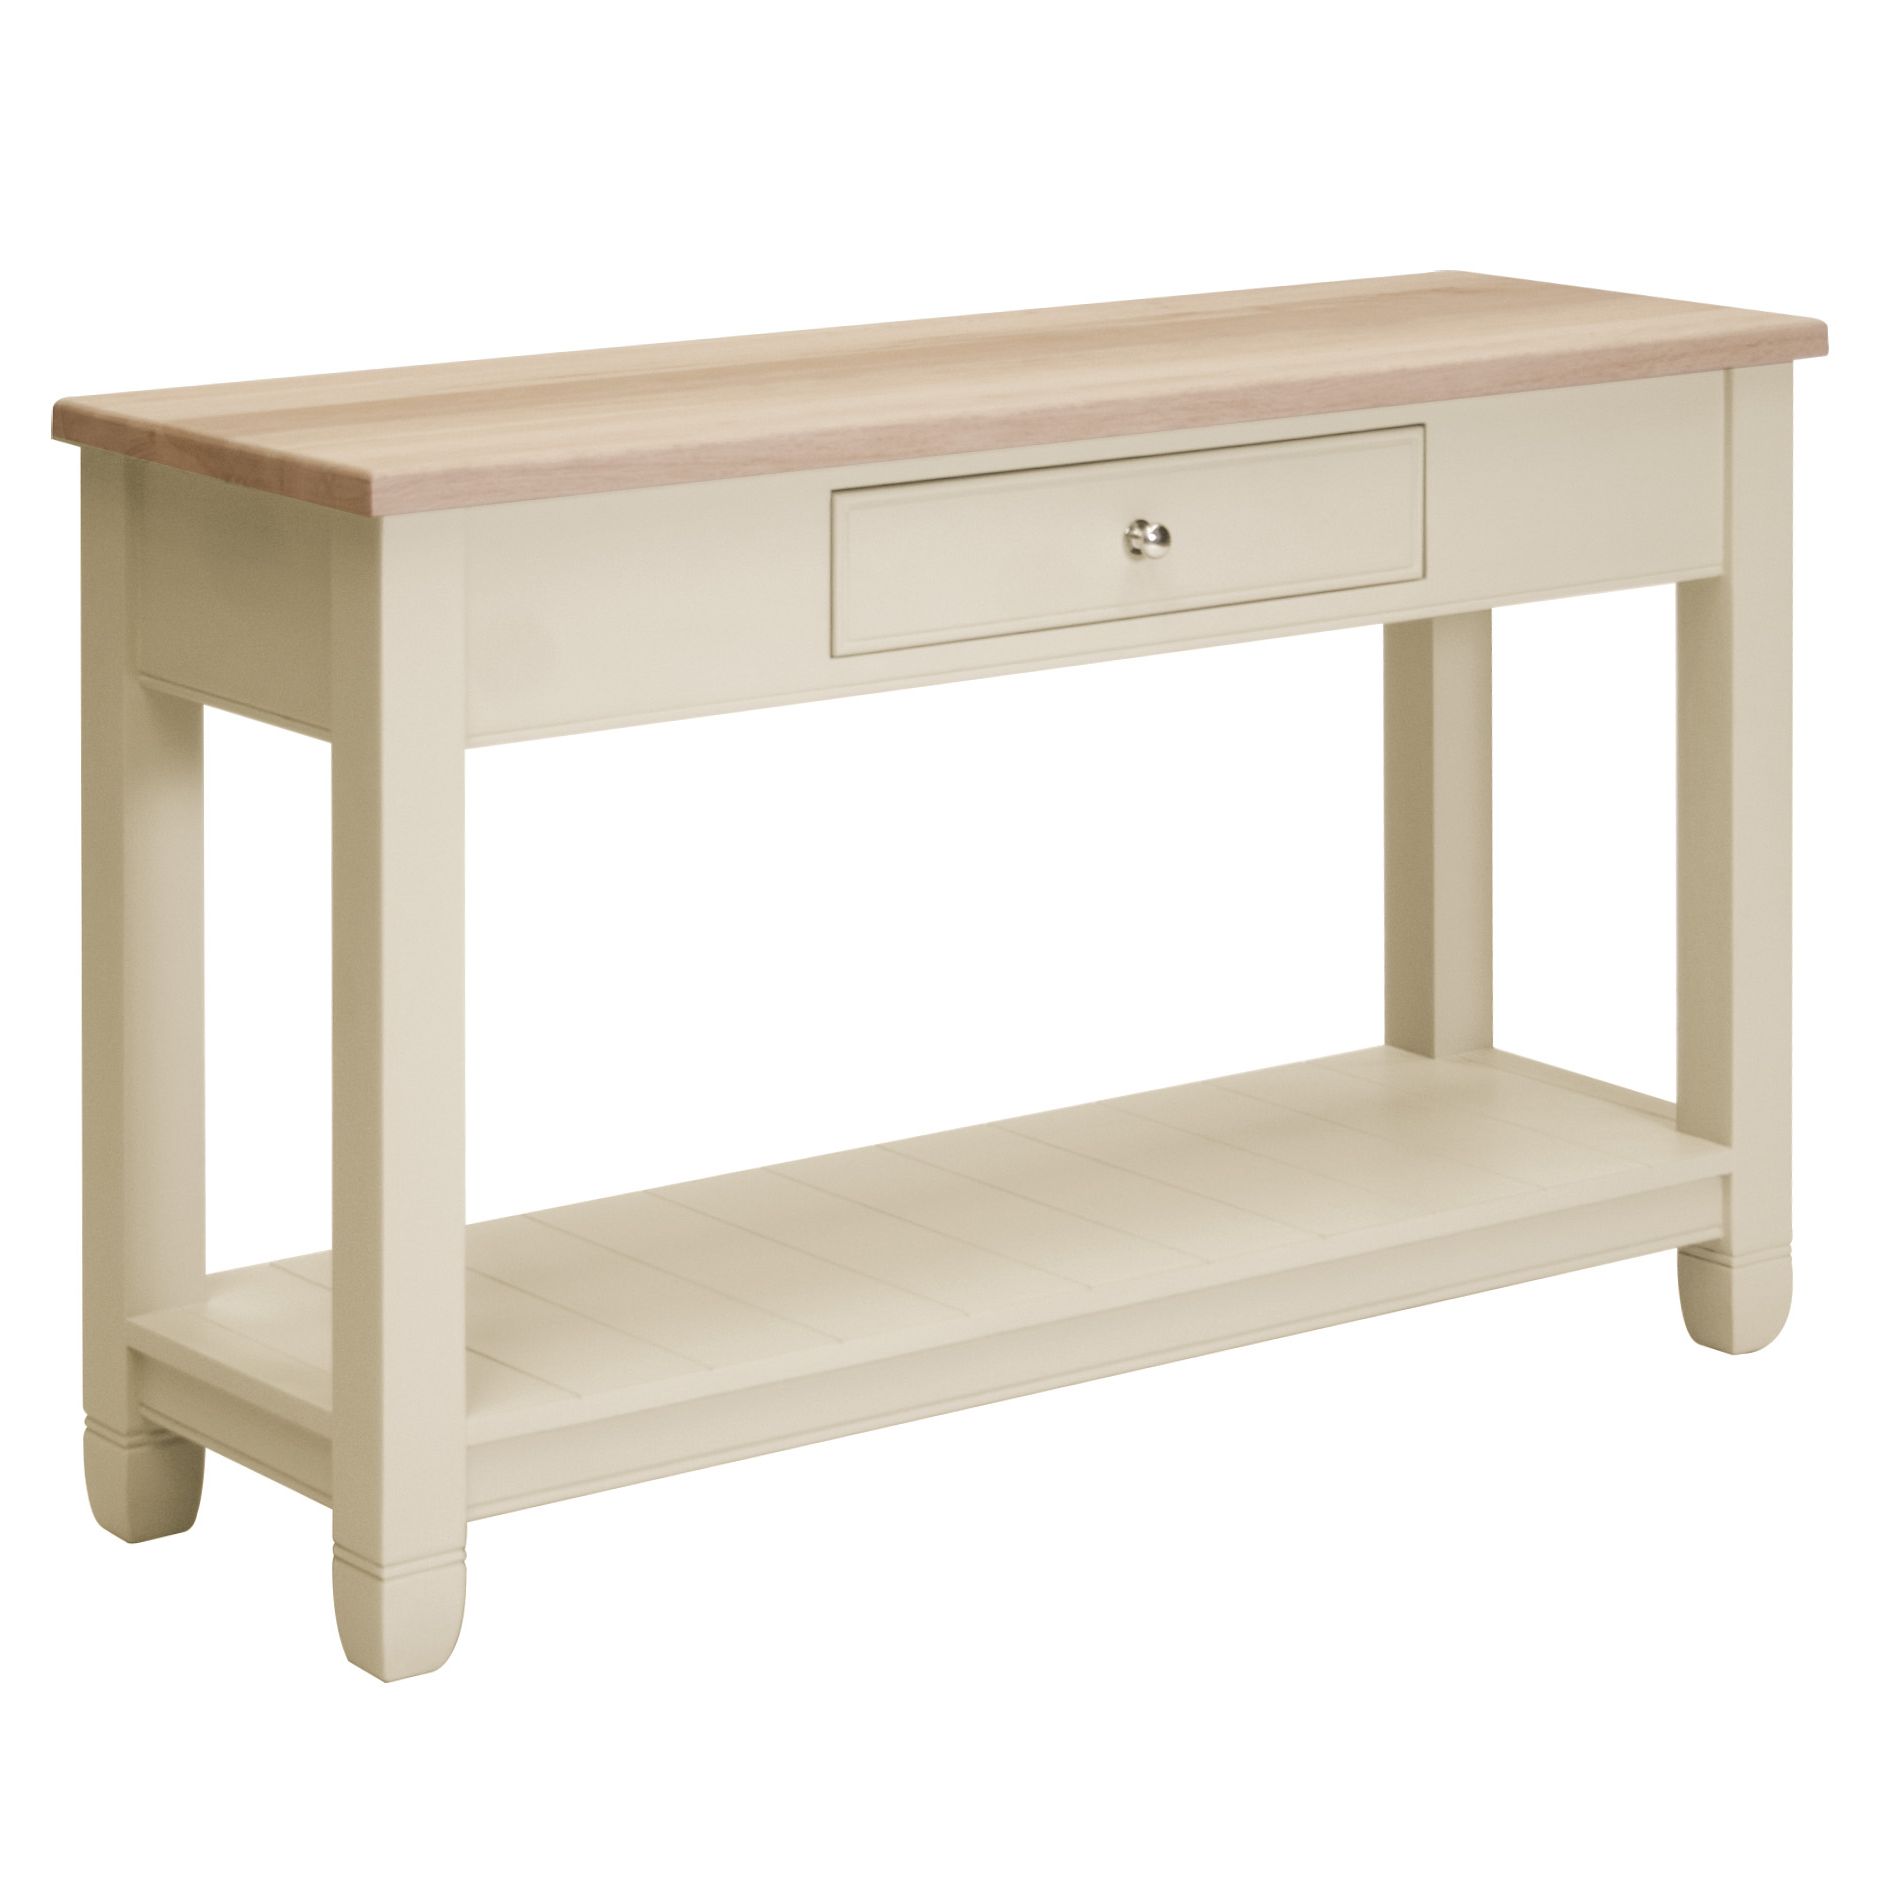 Neptune Chichester Console Table, Limestone at John Lewis